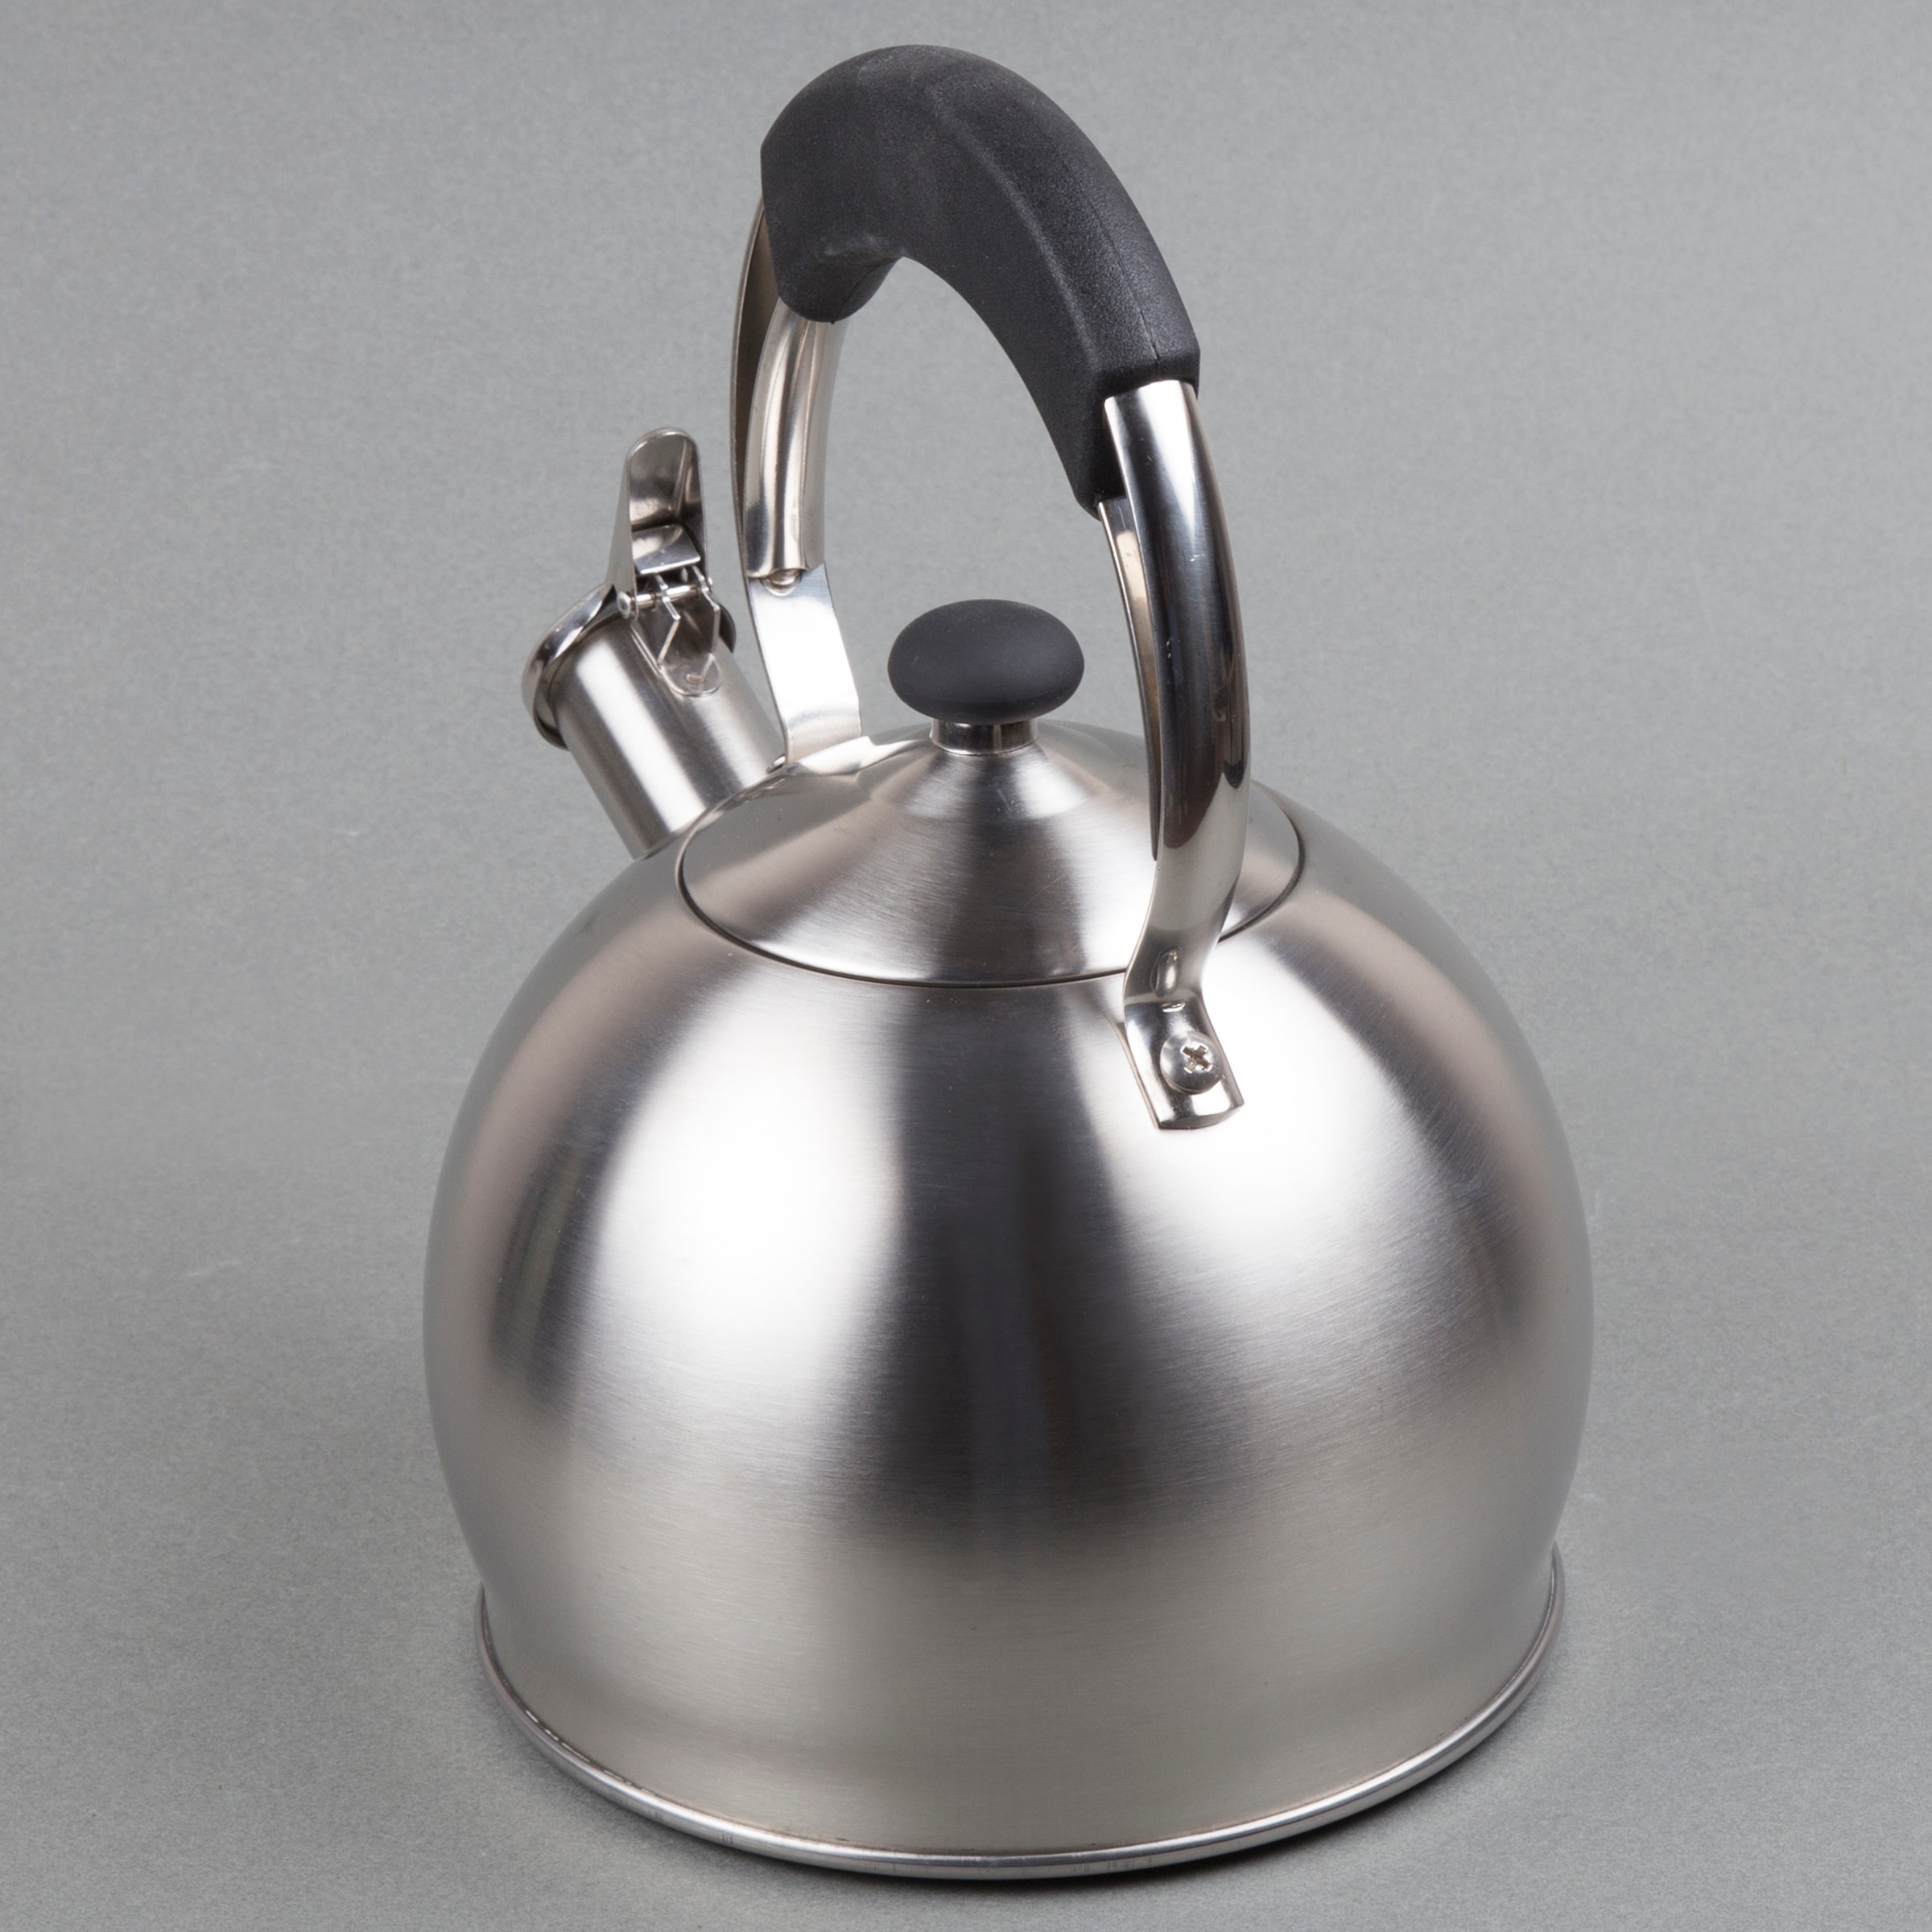 https://ak1.ostkcdn.com/images/products/10666509/Creative-Home-Galaxy-2.6-Qt-Whistling-Stainless-Steel-Tea-Kettle-84e80e85-8fa5-4101-895d-1c32fd3f5f3f.jpg